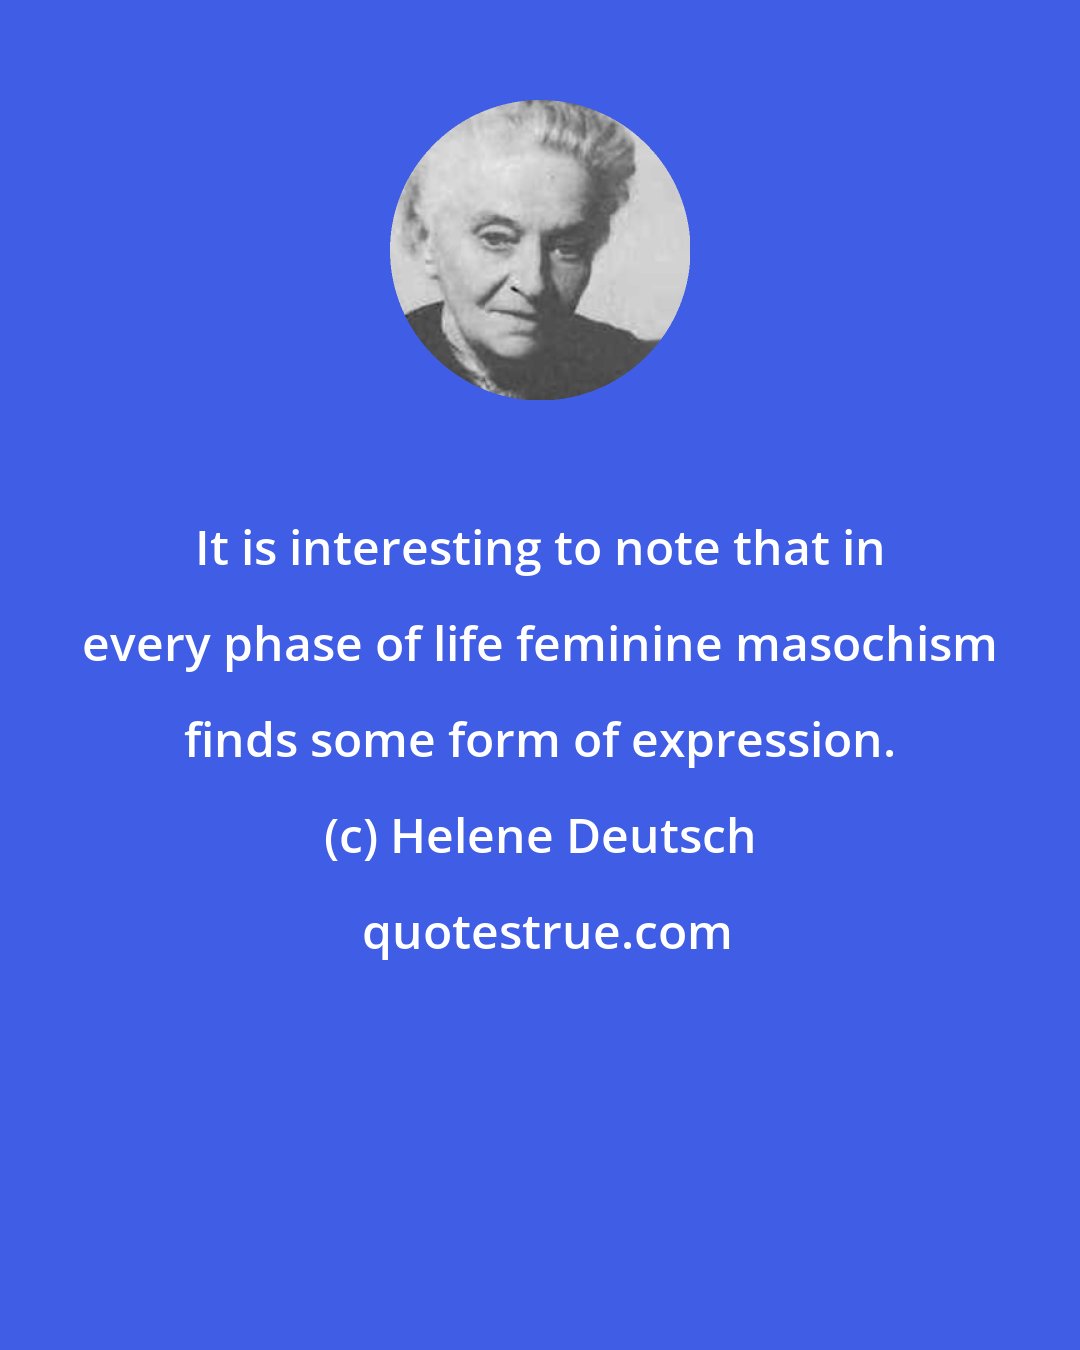 Helene Deutsch: It is interesting to note that in every phase of life feminine masochism finds some form of expression.